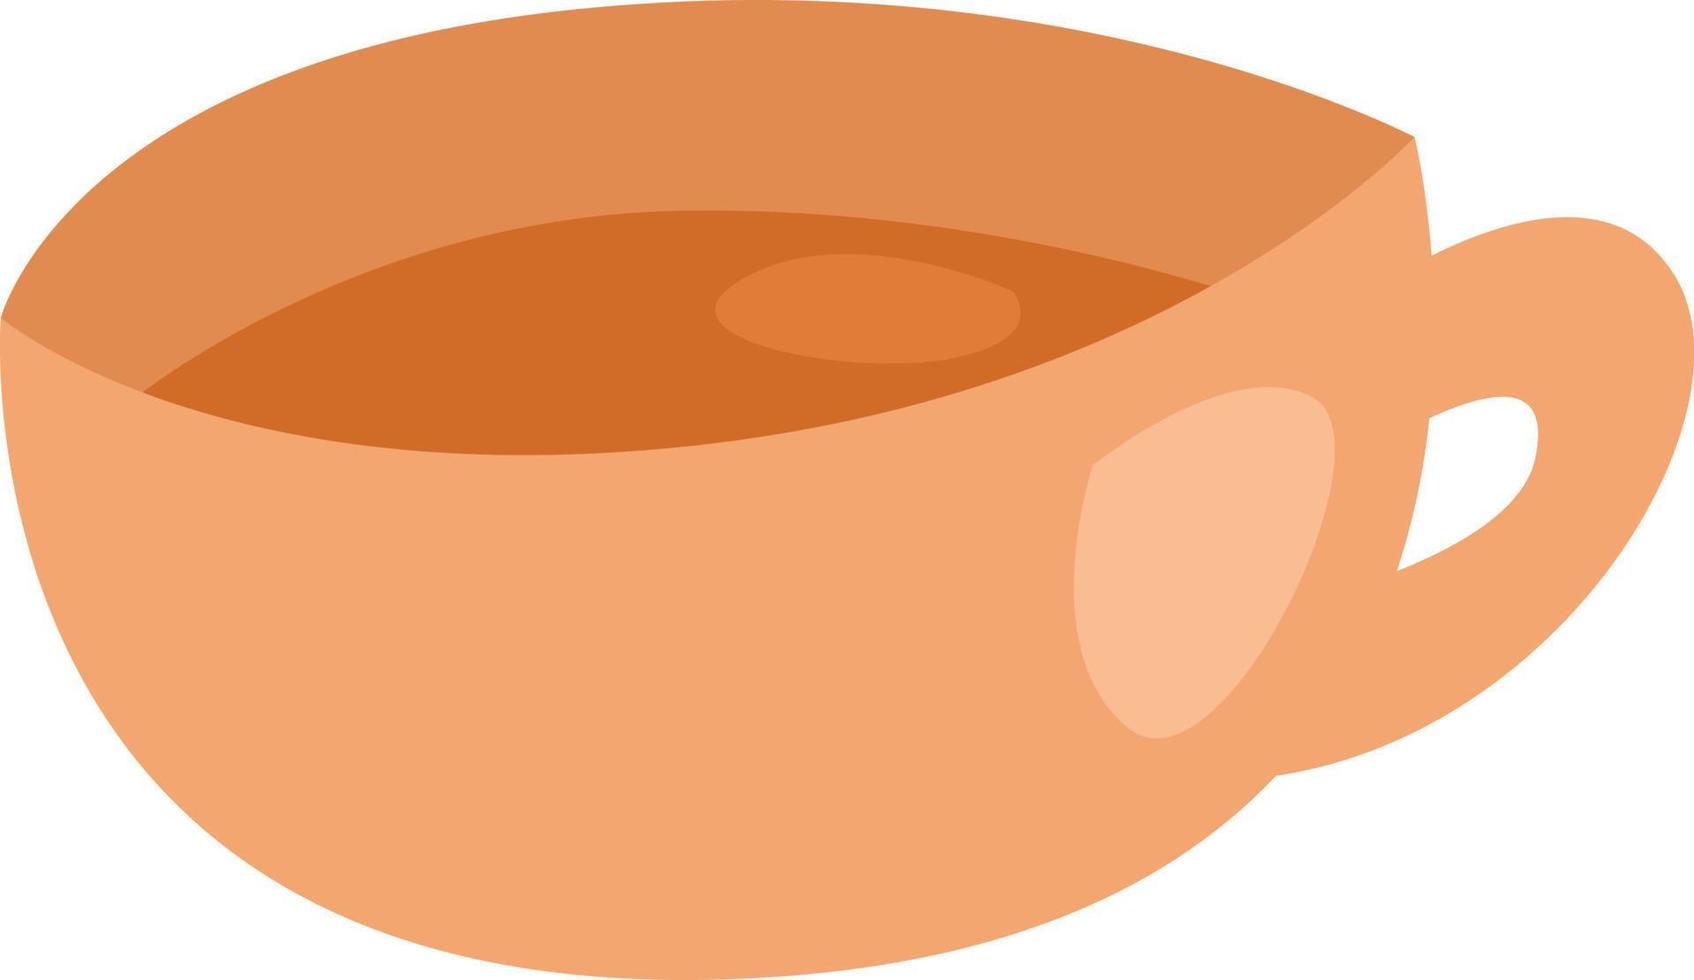 Small cup, illustration, vector on a white background.